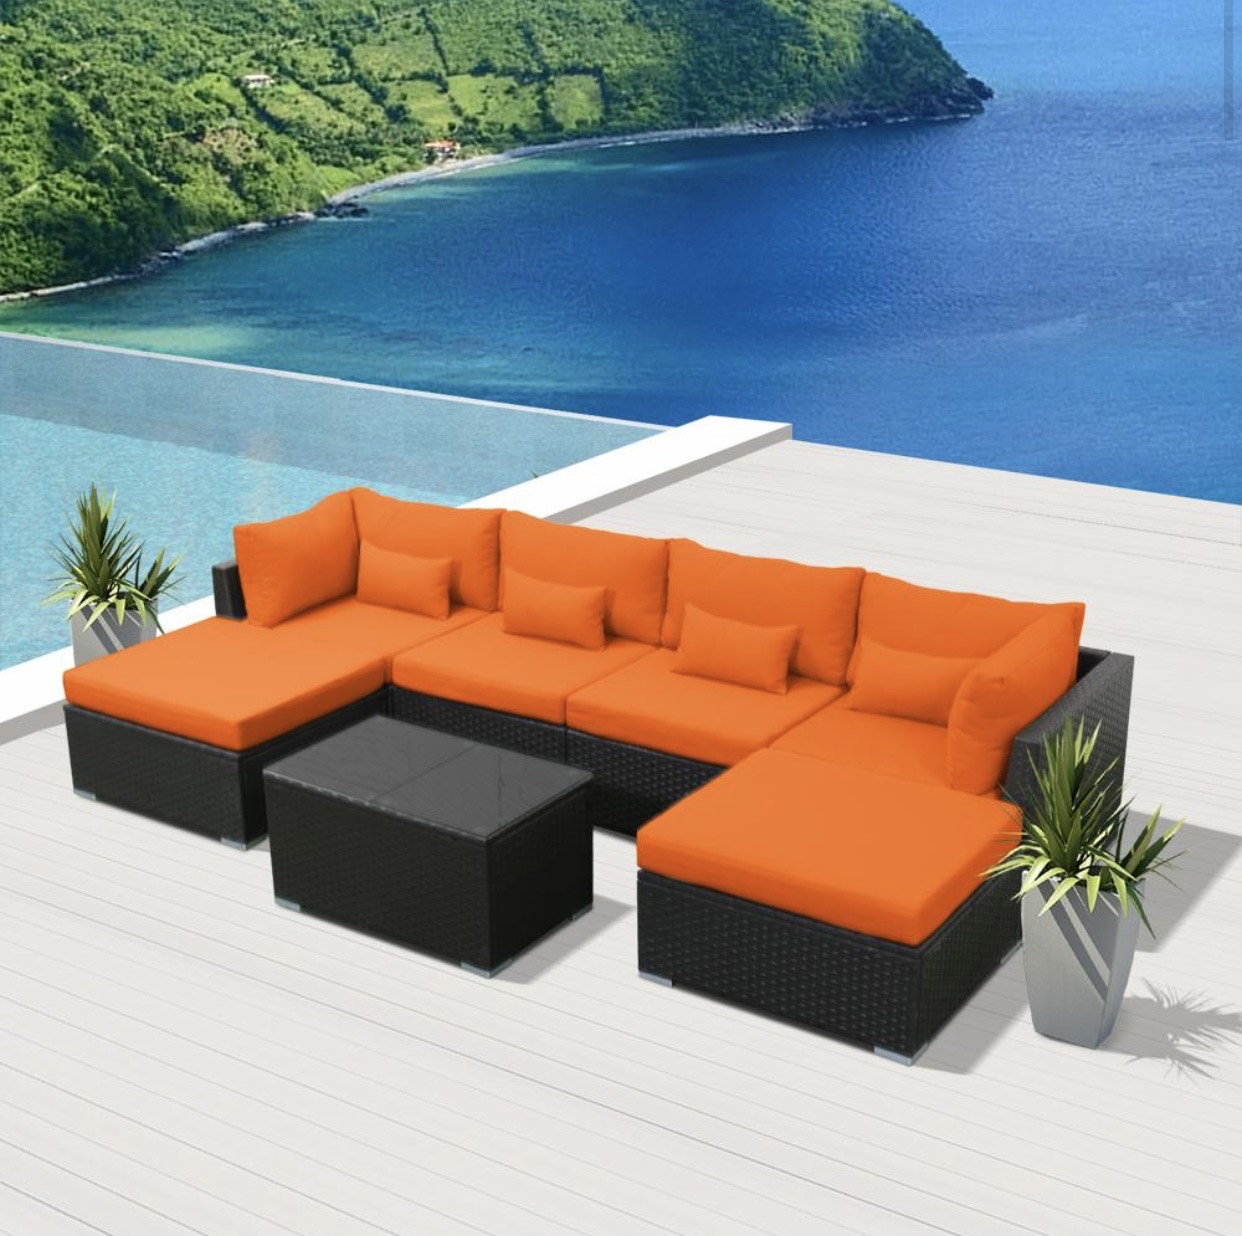 Orange 7C Replacement Cushion Covers Outdoor Patio Furniture Set (Without Foam Insis)